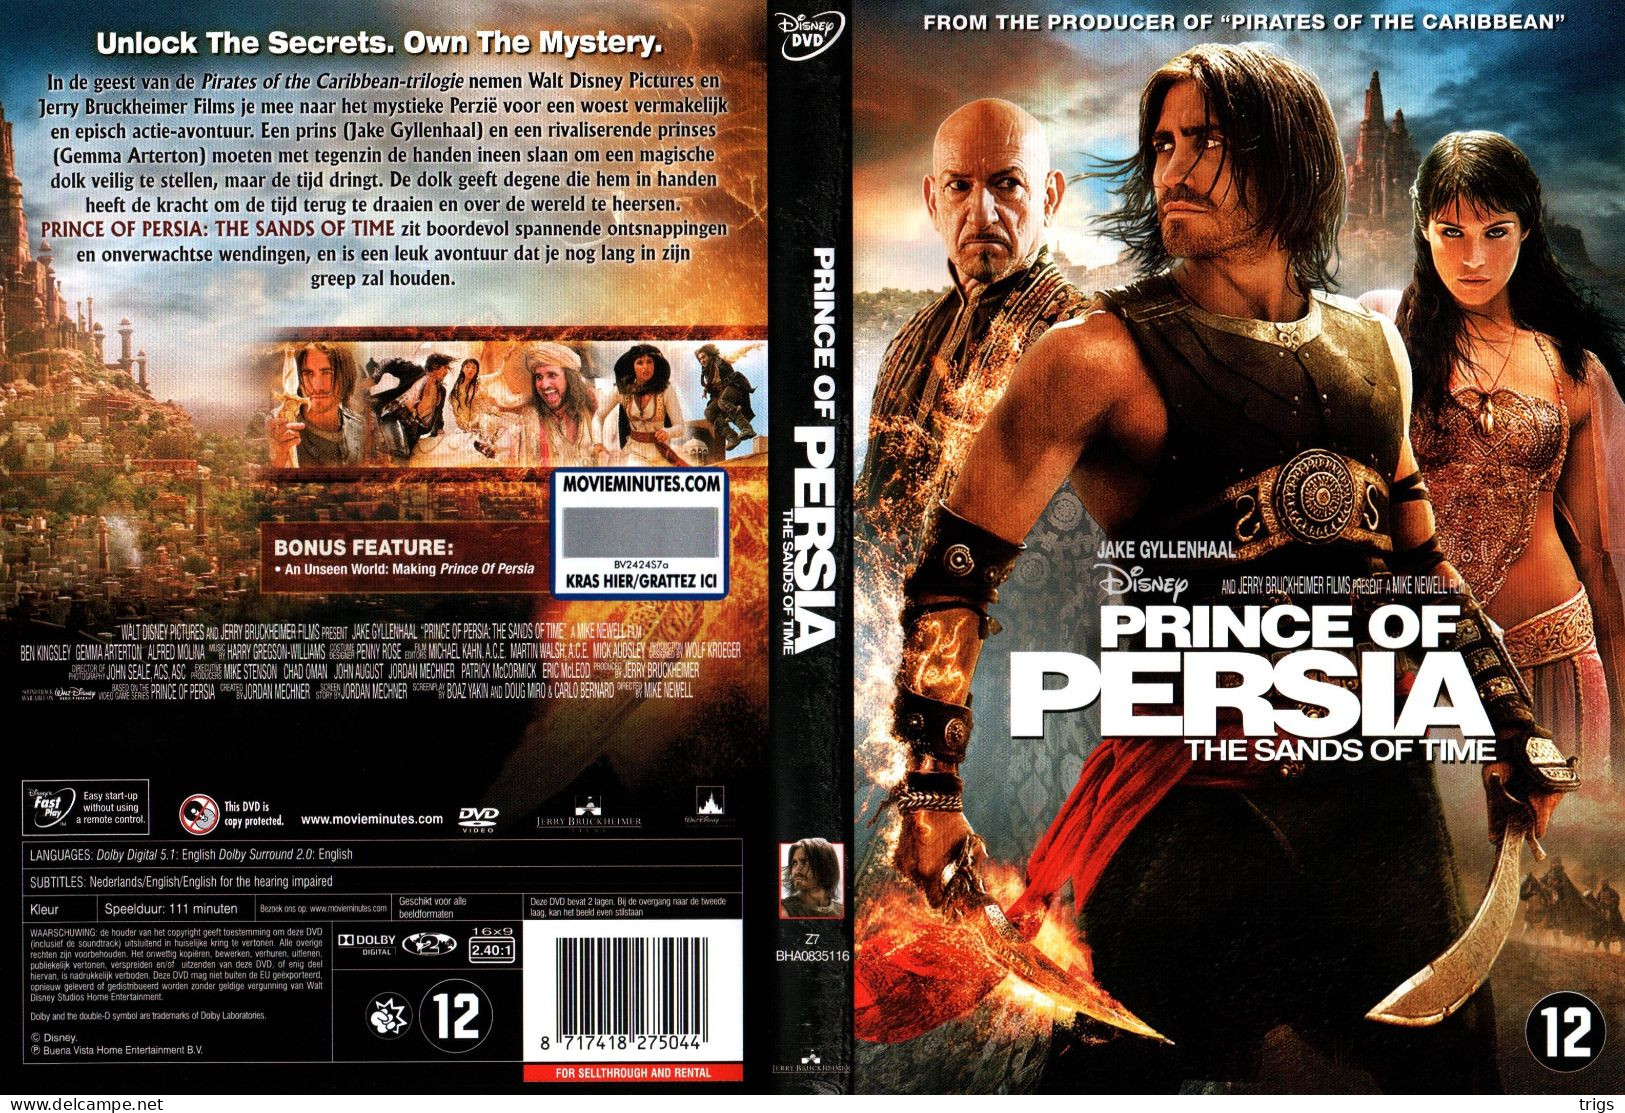 DVD - Prince Of Persia: The Sands Of Time - Actie, Avontuur